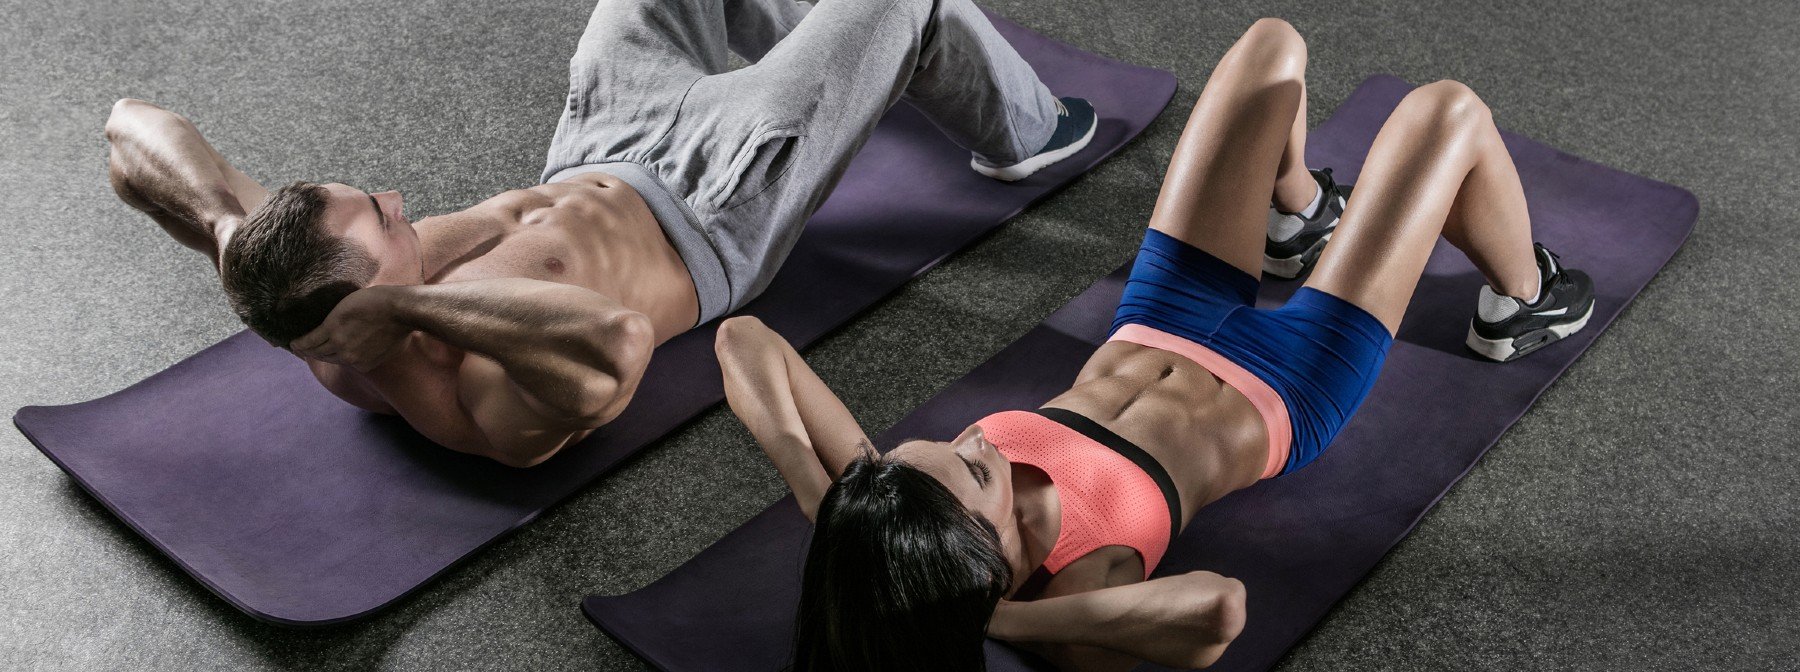 The 9 Best Ab Exercises You Can Do Without Equipment - MYPROTEIN™